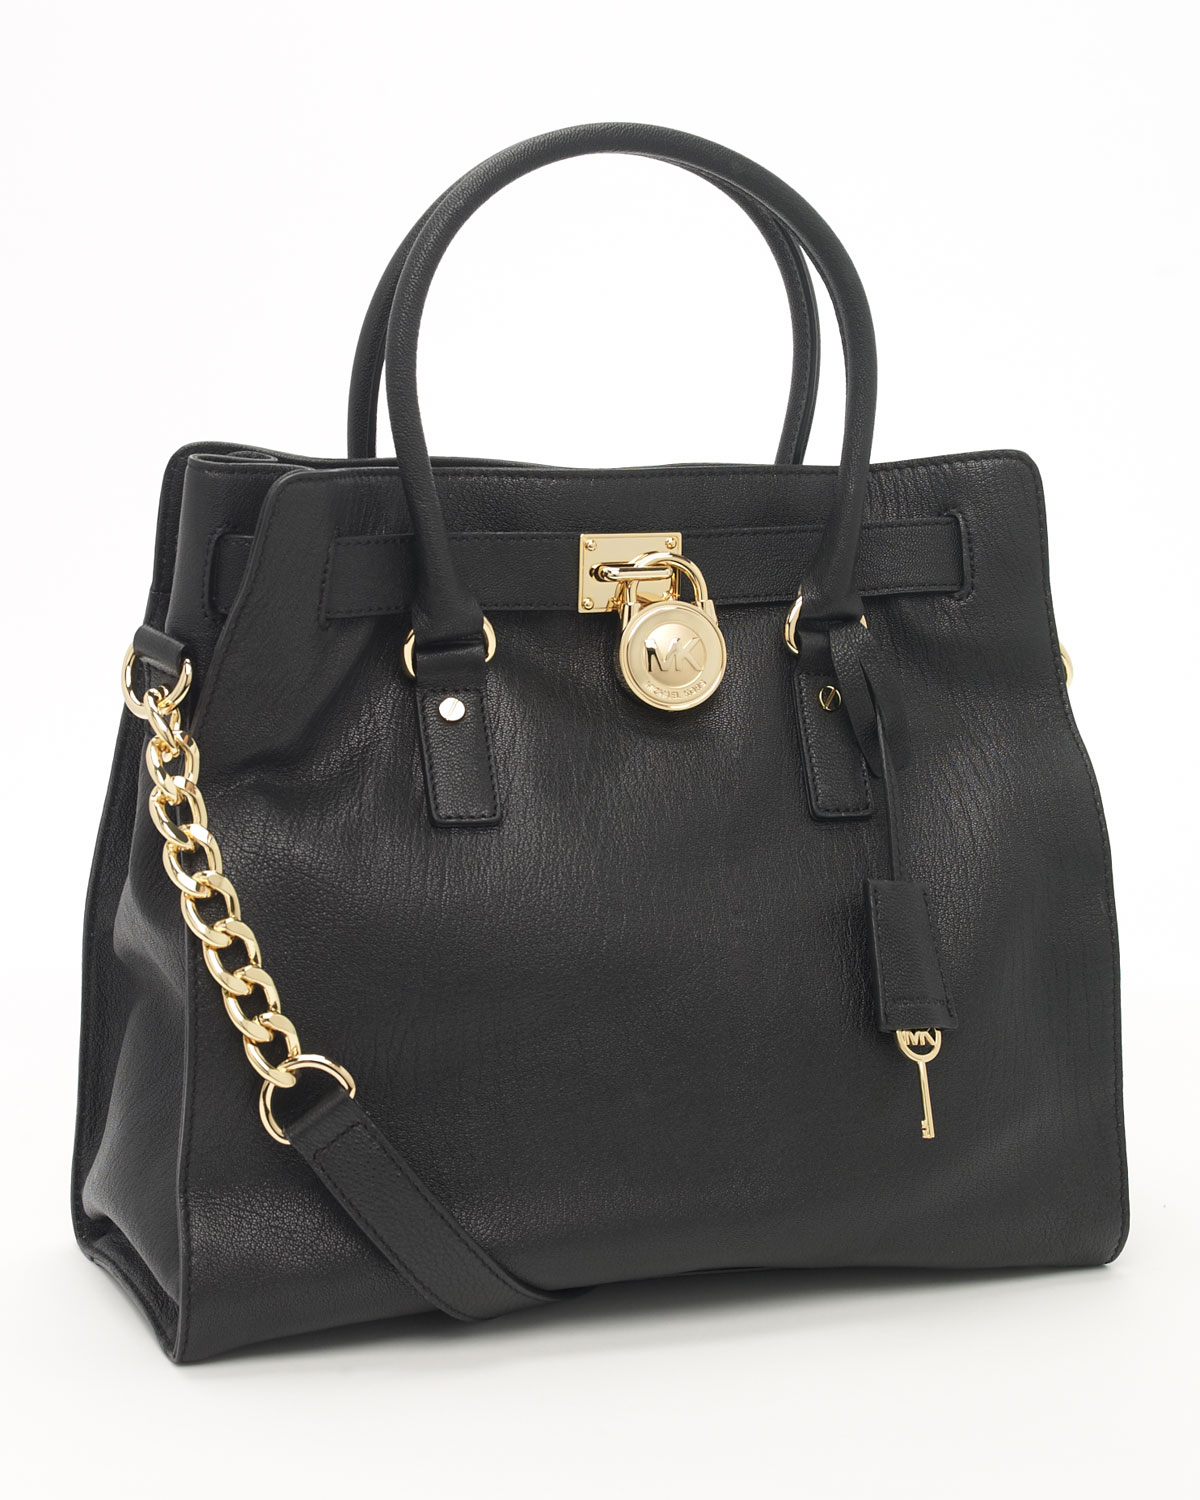 hand check it out here michael kors hamilton tote black